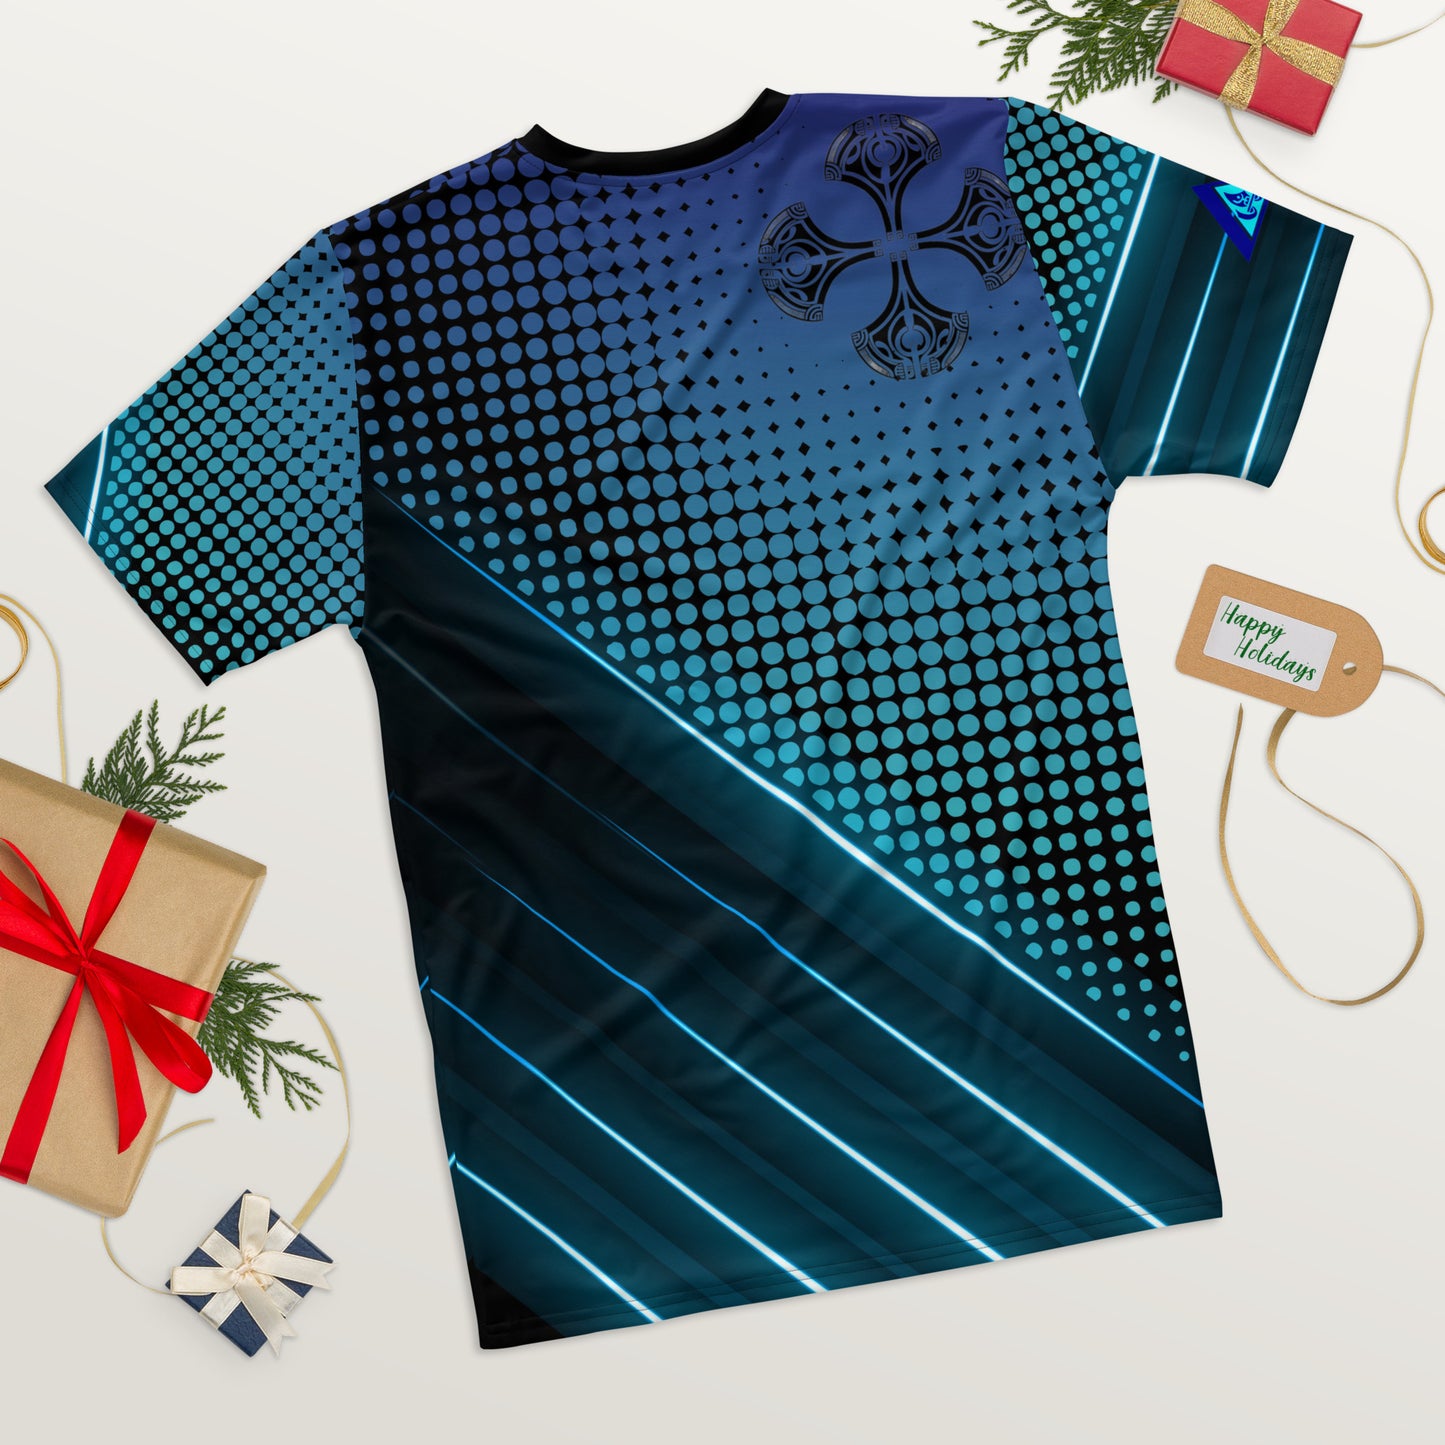 This men's graphic tee features a Pacific Islander tattoo pattern with bold blue lines and circles